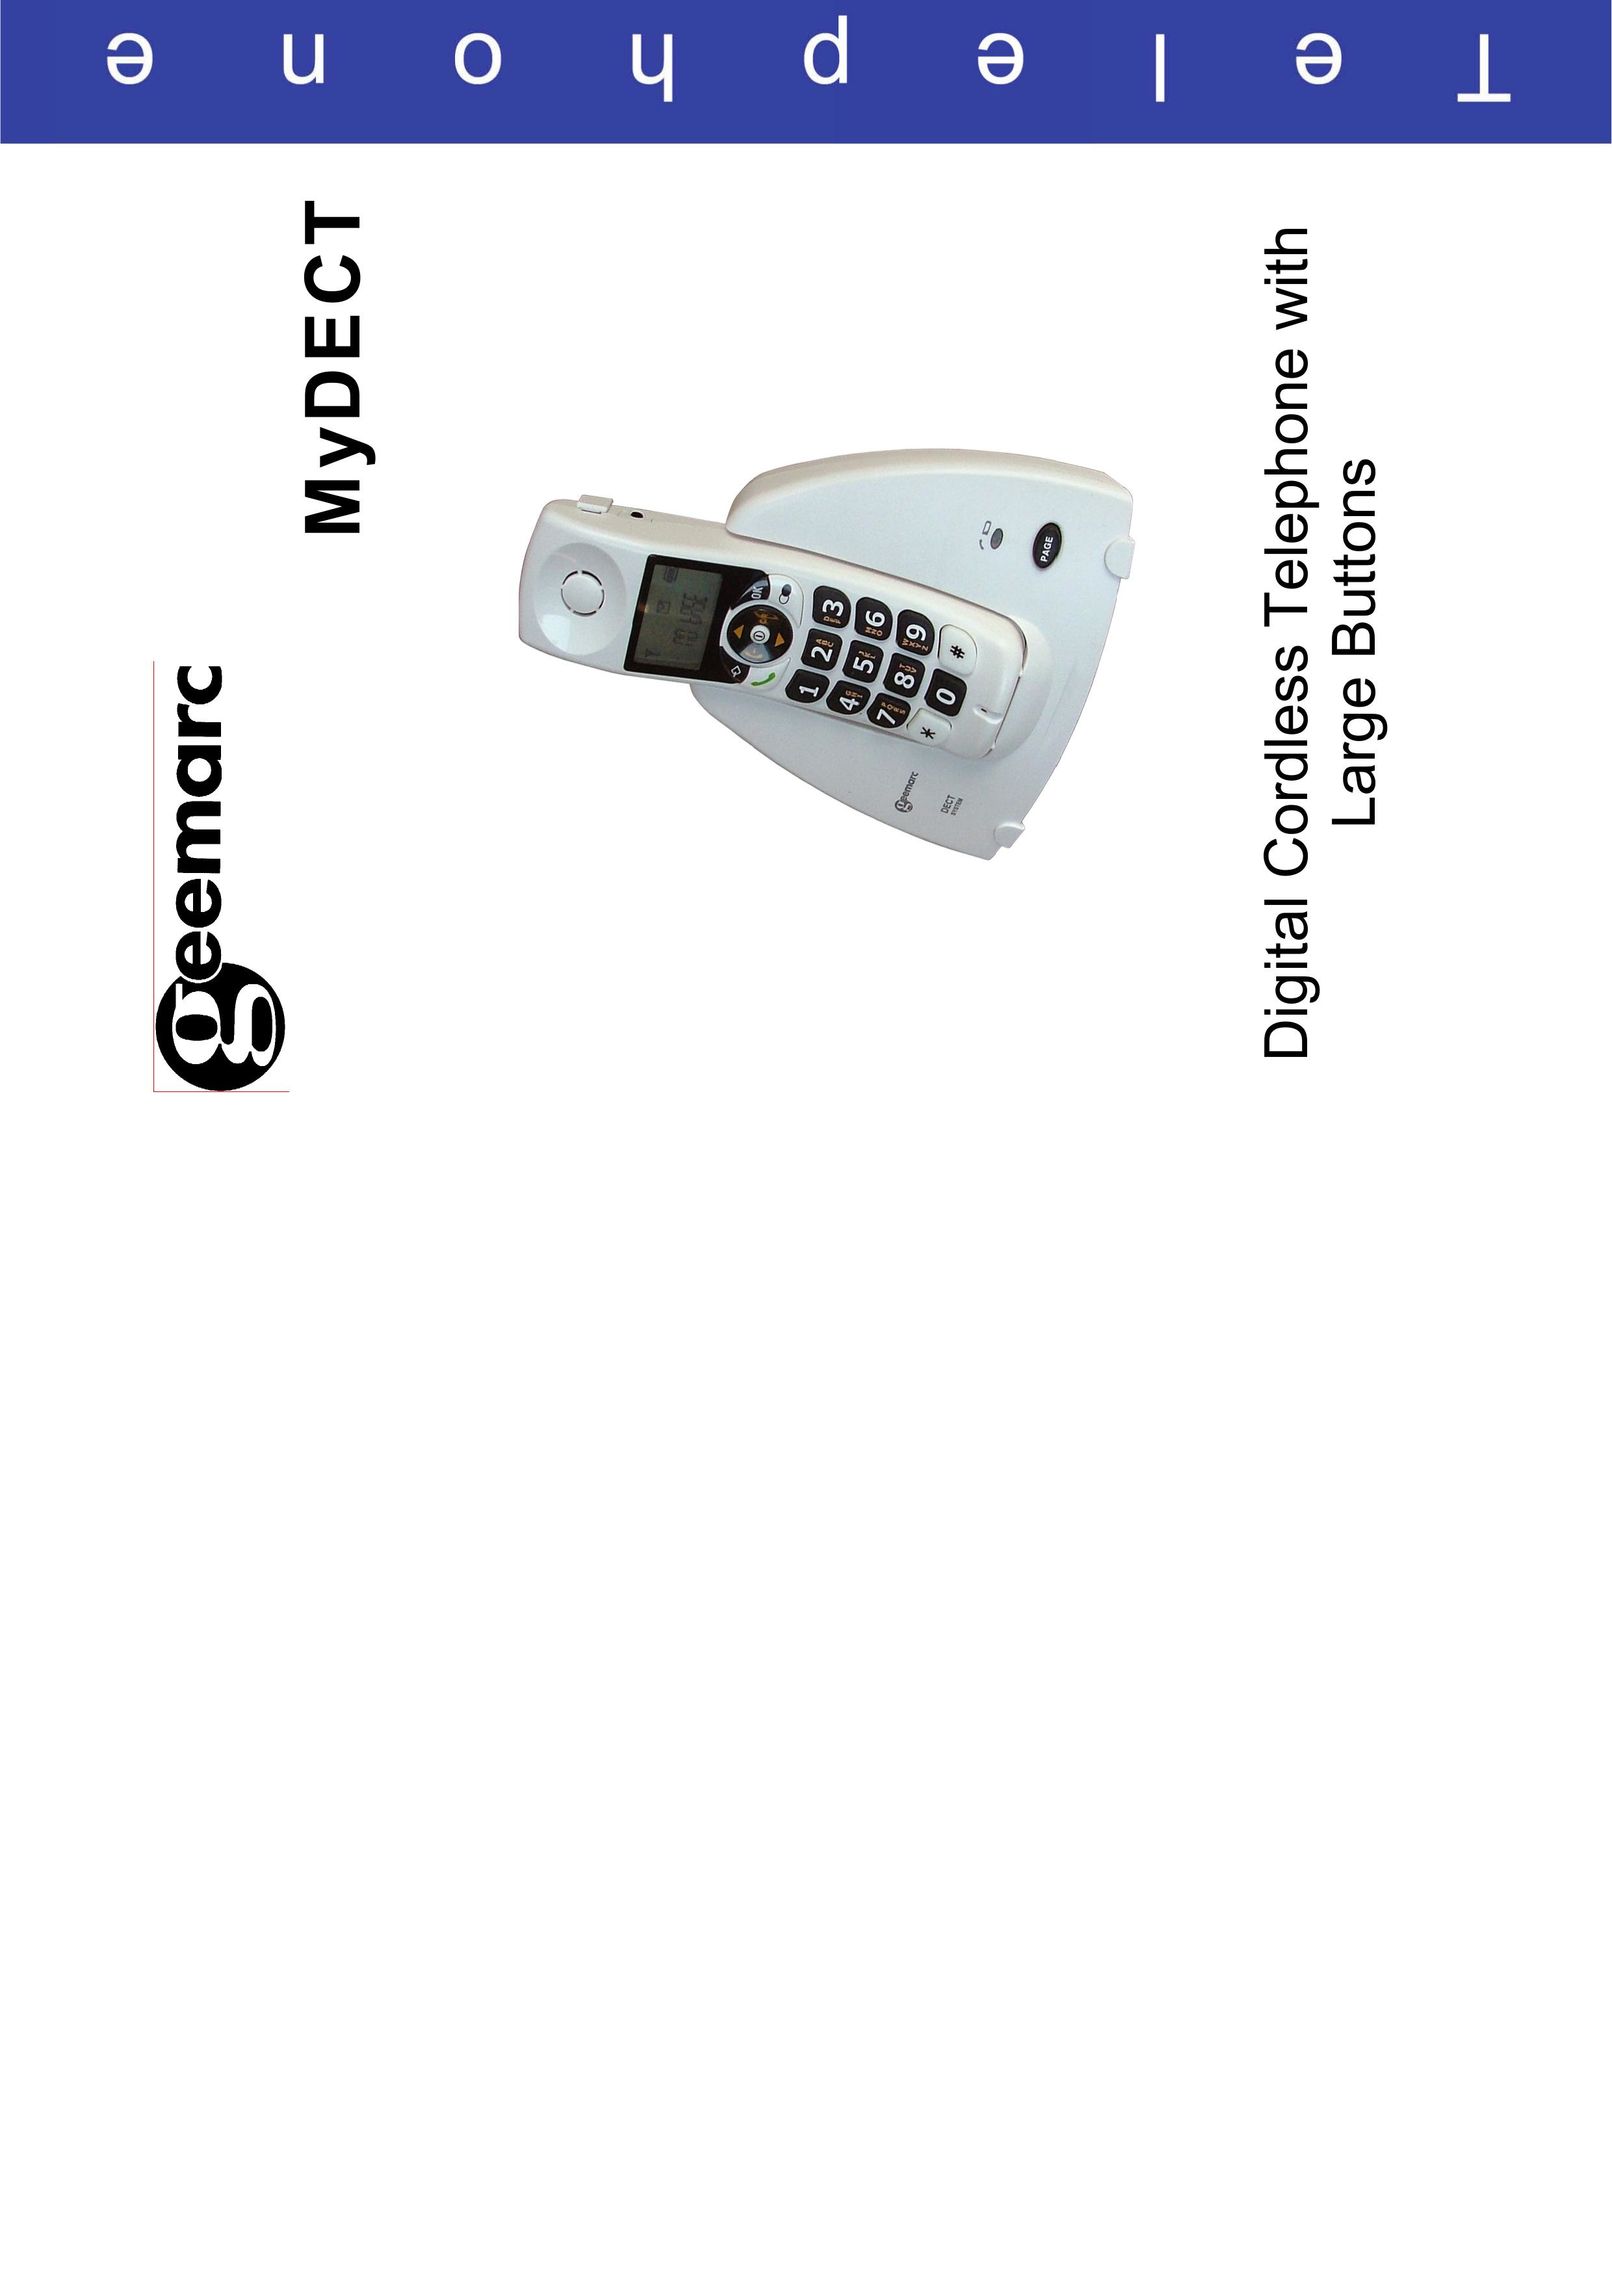 Geemarc MyDECT Cordless Telephone User Manual